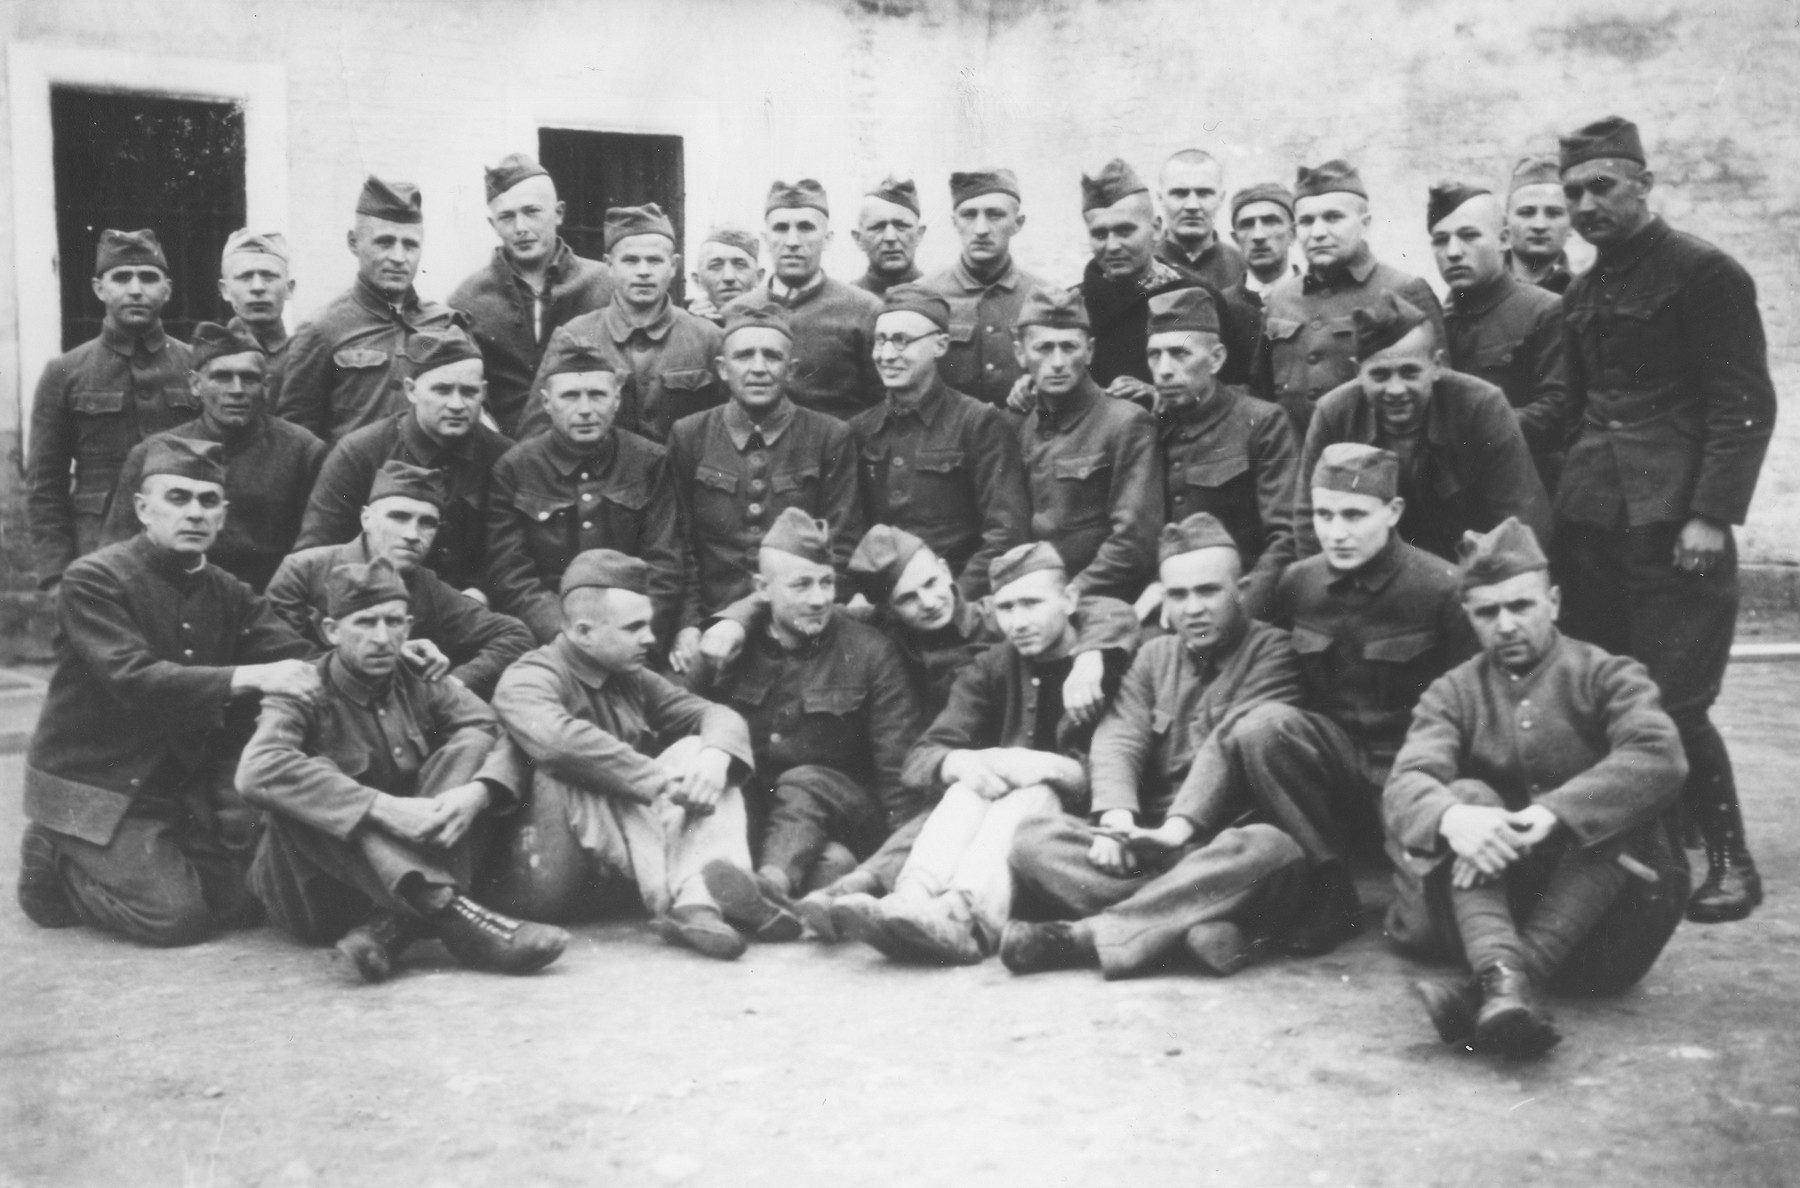 Group portrait of Czech political prisoners who shared a cell bloc in Theresienstadt.

Oskar Bartolsic is pictured in the front row, second from the left.